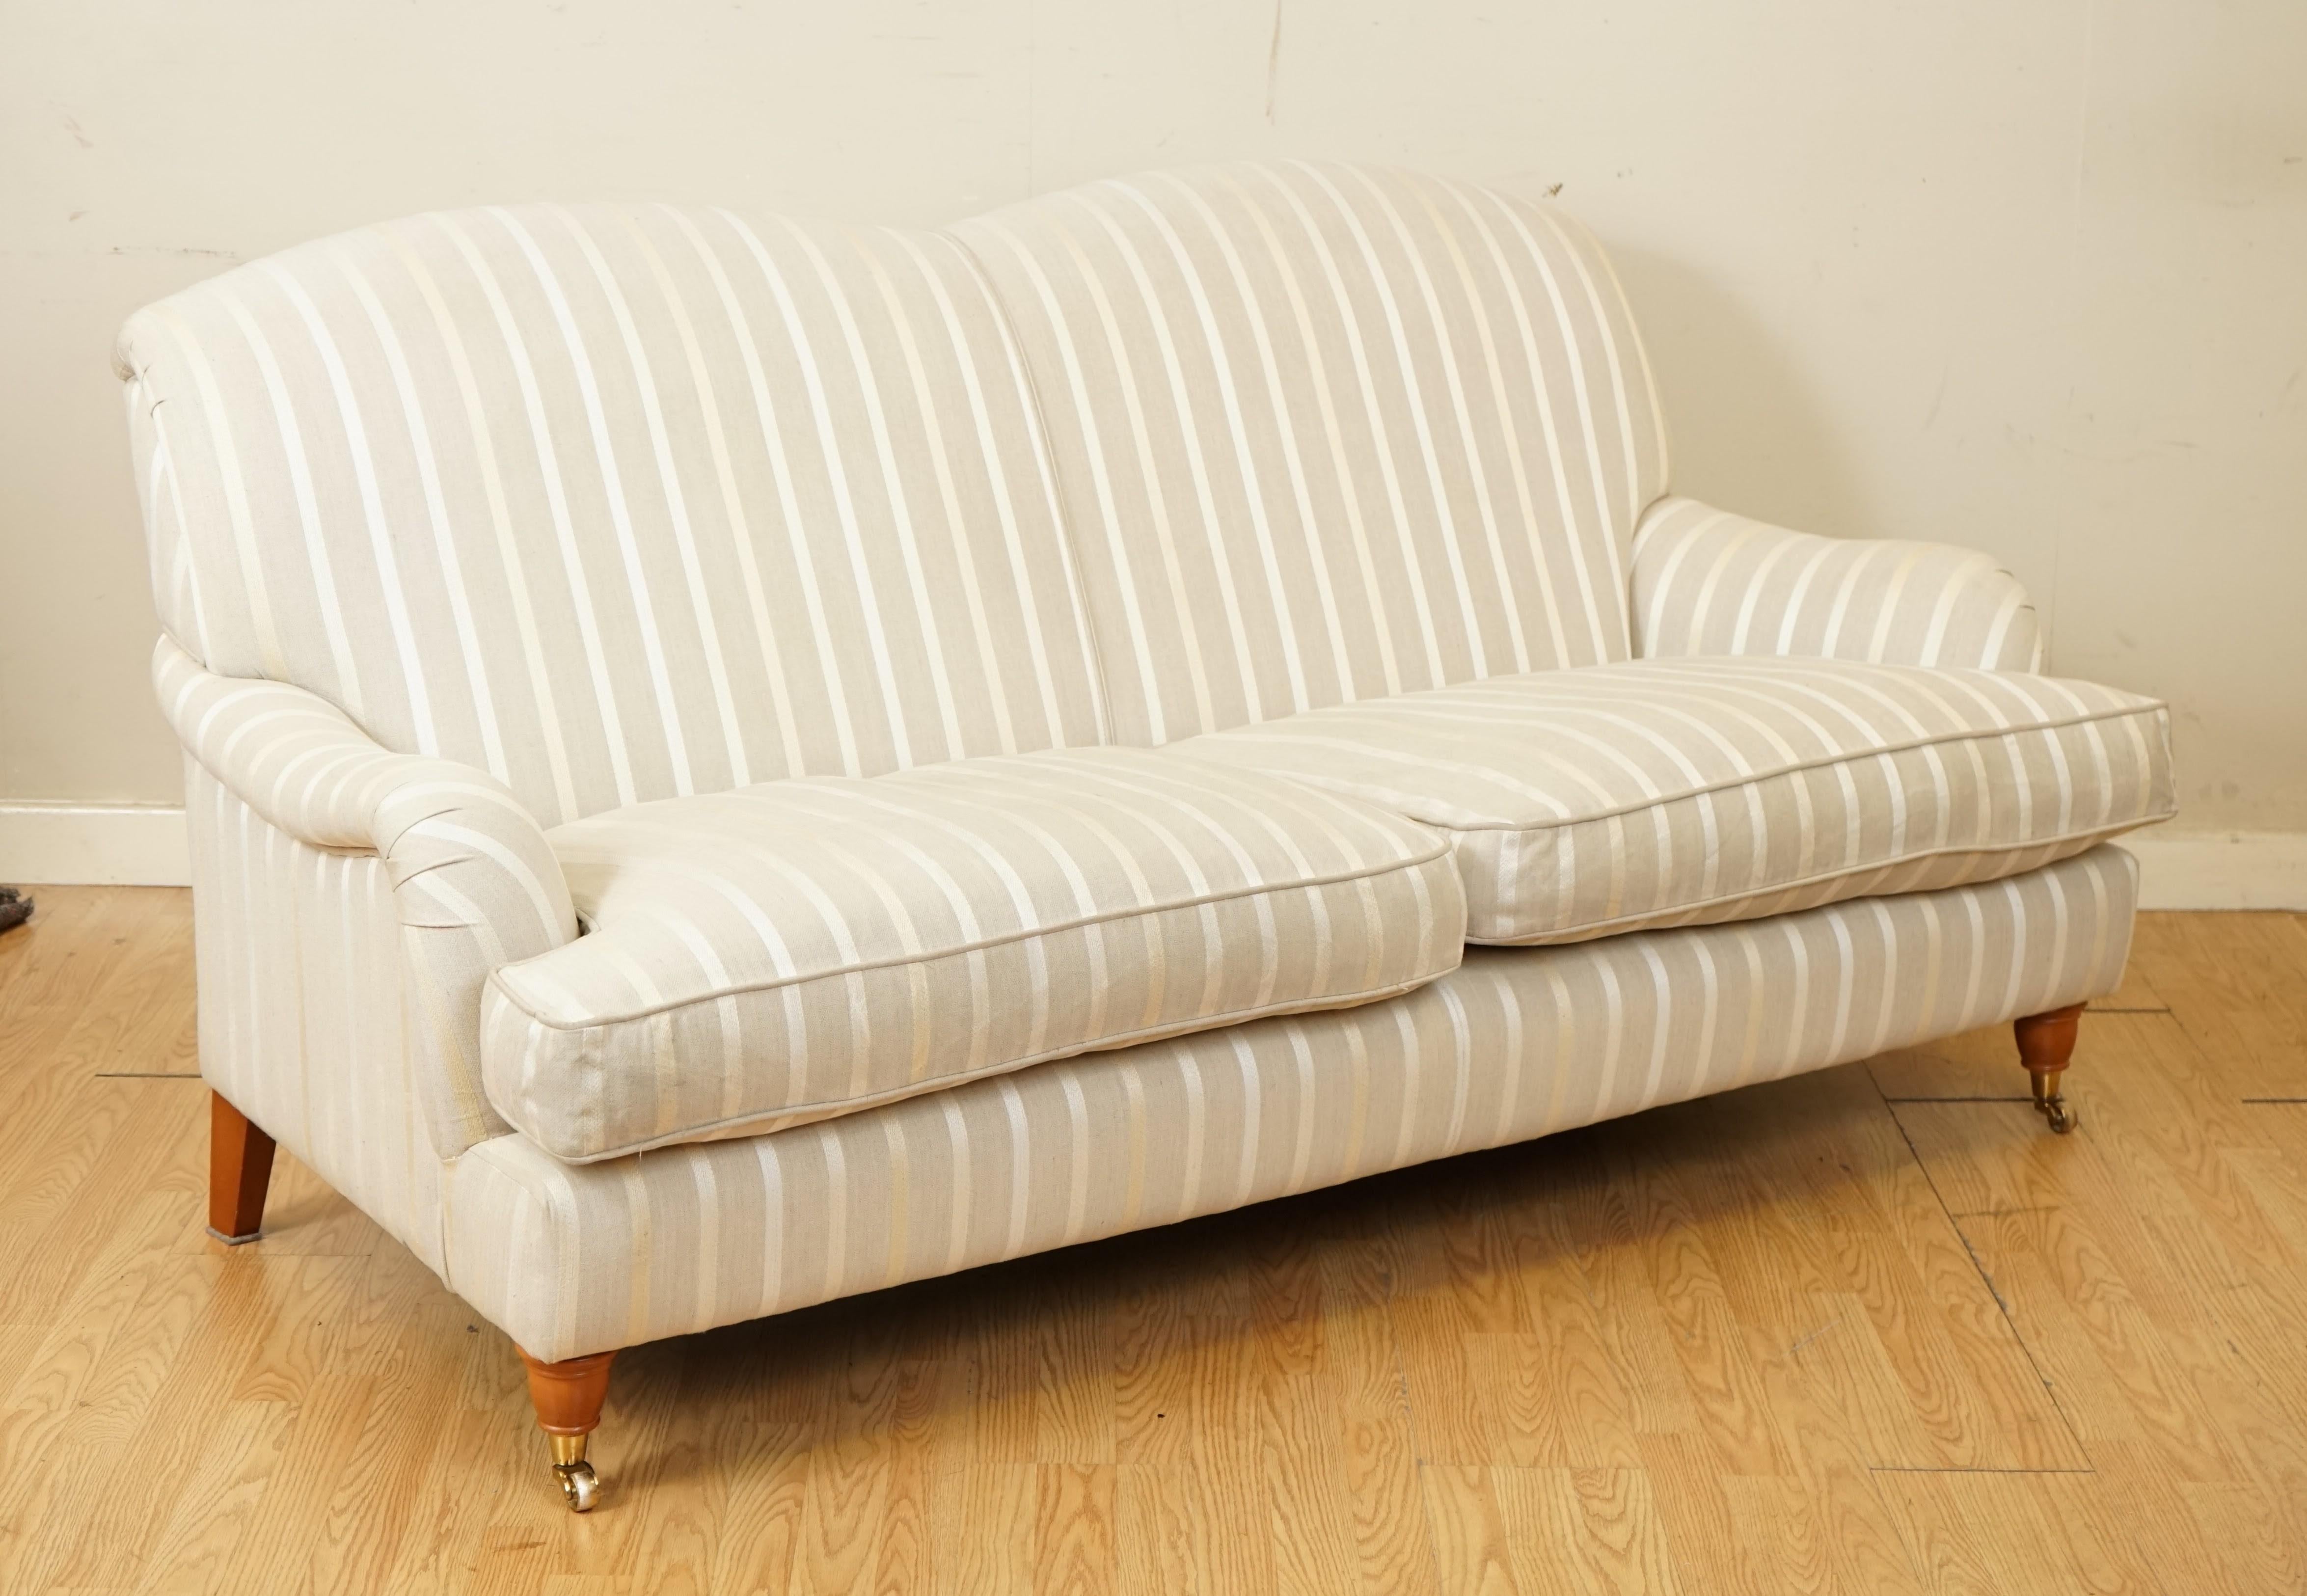 We are so excited to present to you this Gorgeous Laura Ashley Howard Style Sofa.

This is a solid and very good quality sofa, it has been upholstery cleaned.

Please carefully look at the pictures to see the condition before purchasing as they